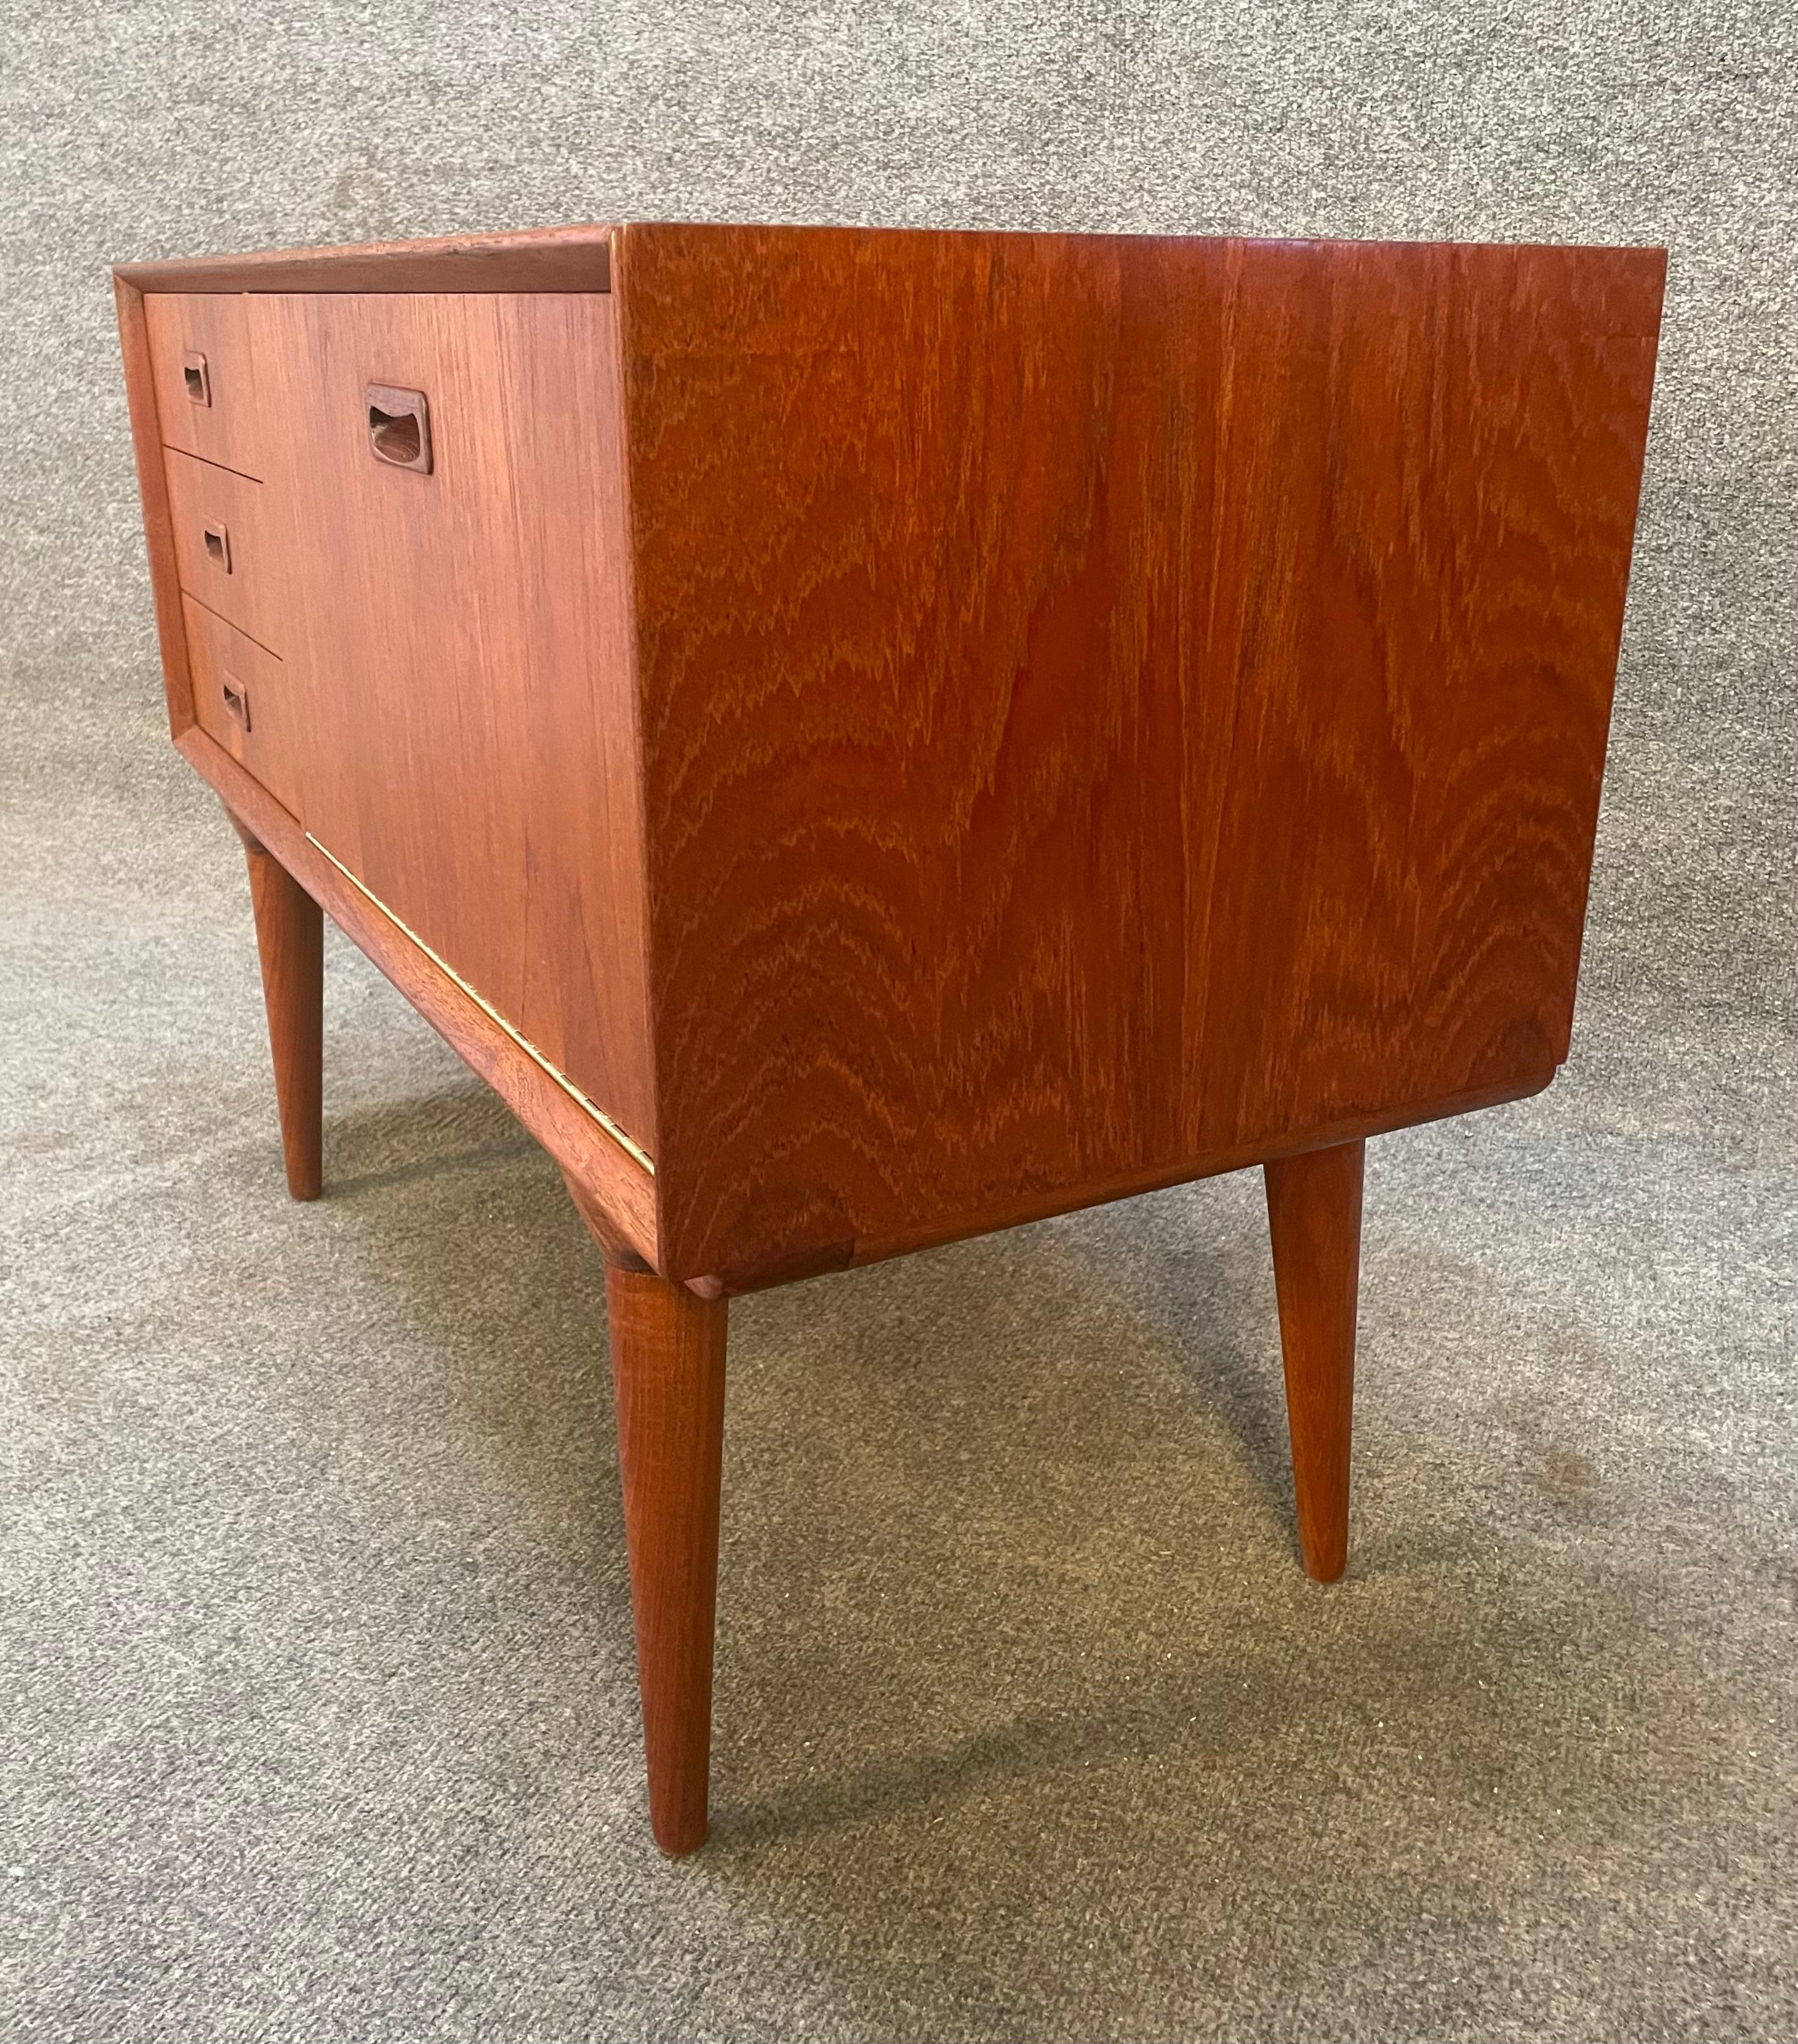 Here is rare scandinavian modern entry chest in teak wood designed by Gunni Oman and manufactured by Omann Jun in Denmark in the 1960's.
This exquisite piece, recently imported from Europe to California before its refinishing, features a vibrant